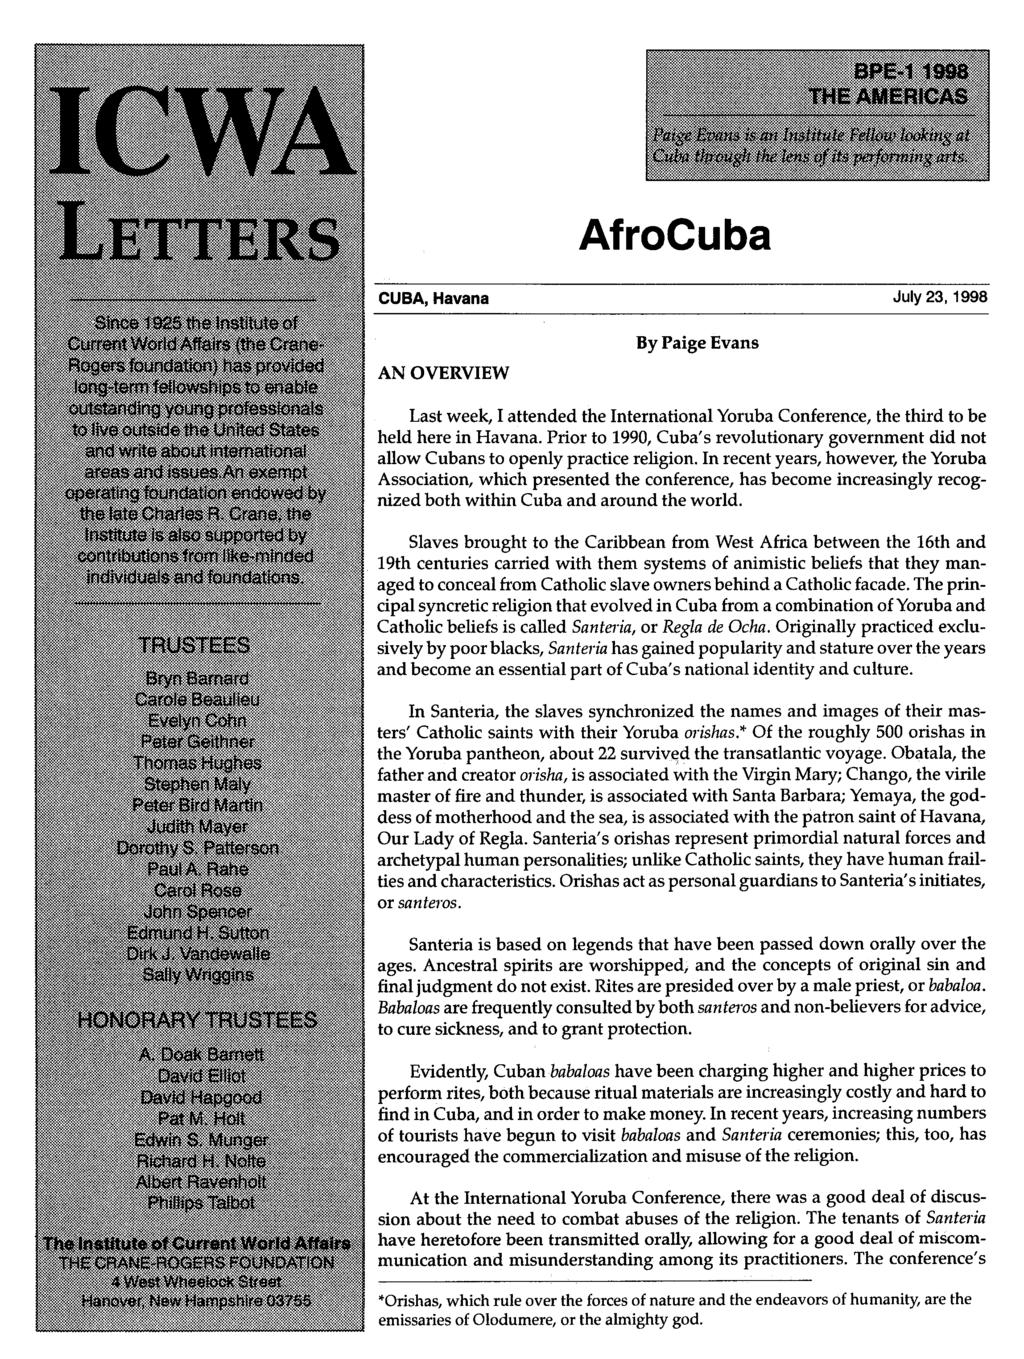 AfroCuba CUBA, Havana July 23, 1998 AN OVERVIEW By Paige Evans Last week, I attended the International Yoruba Conference, the third to be held here in Havana.